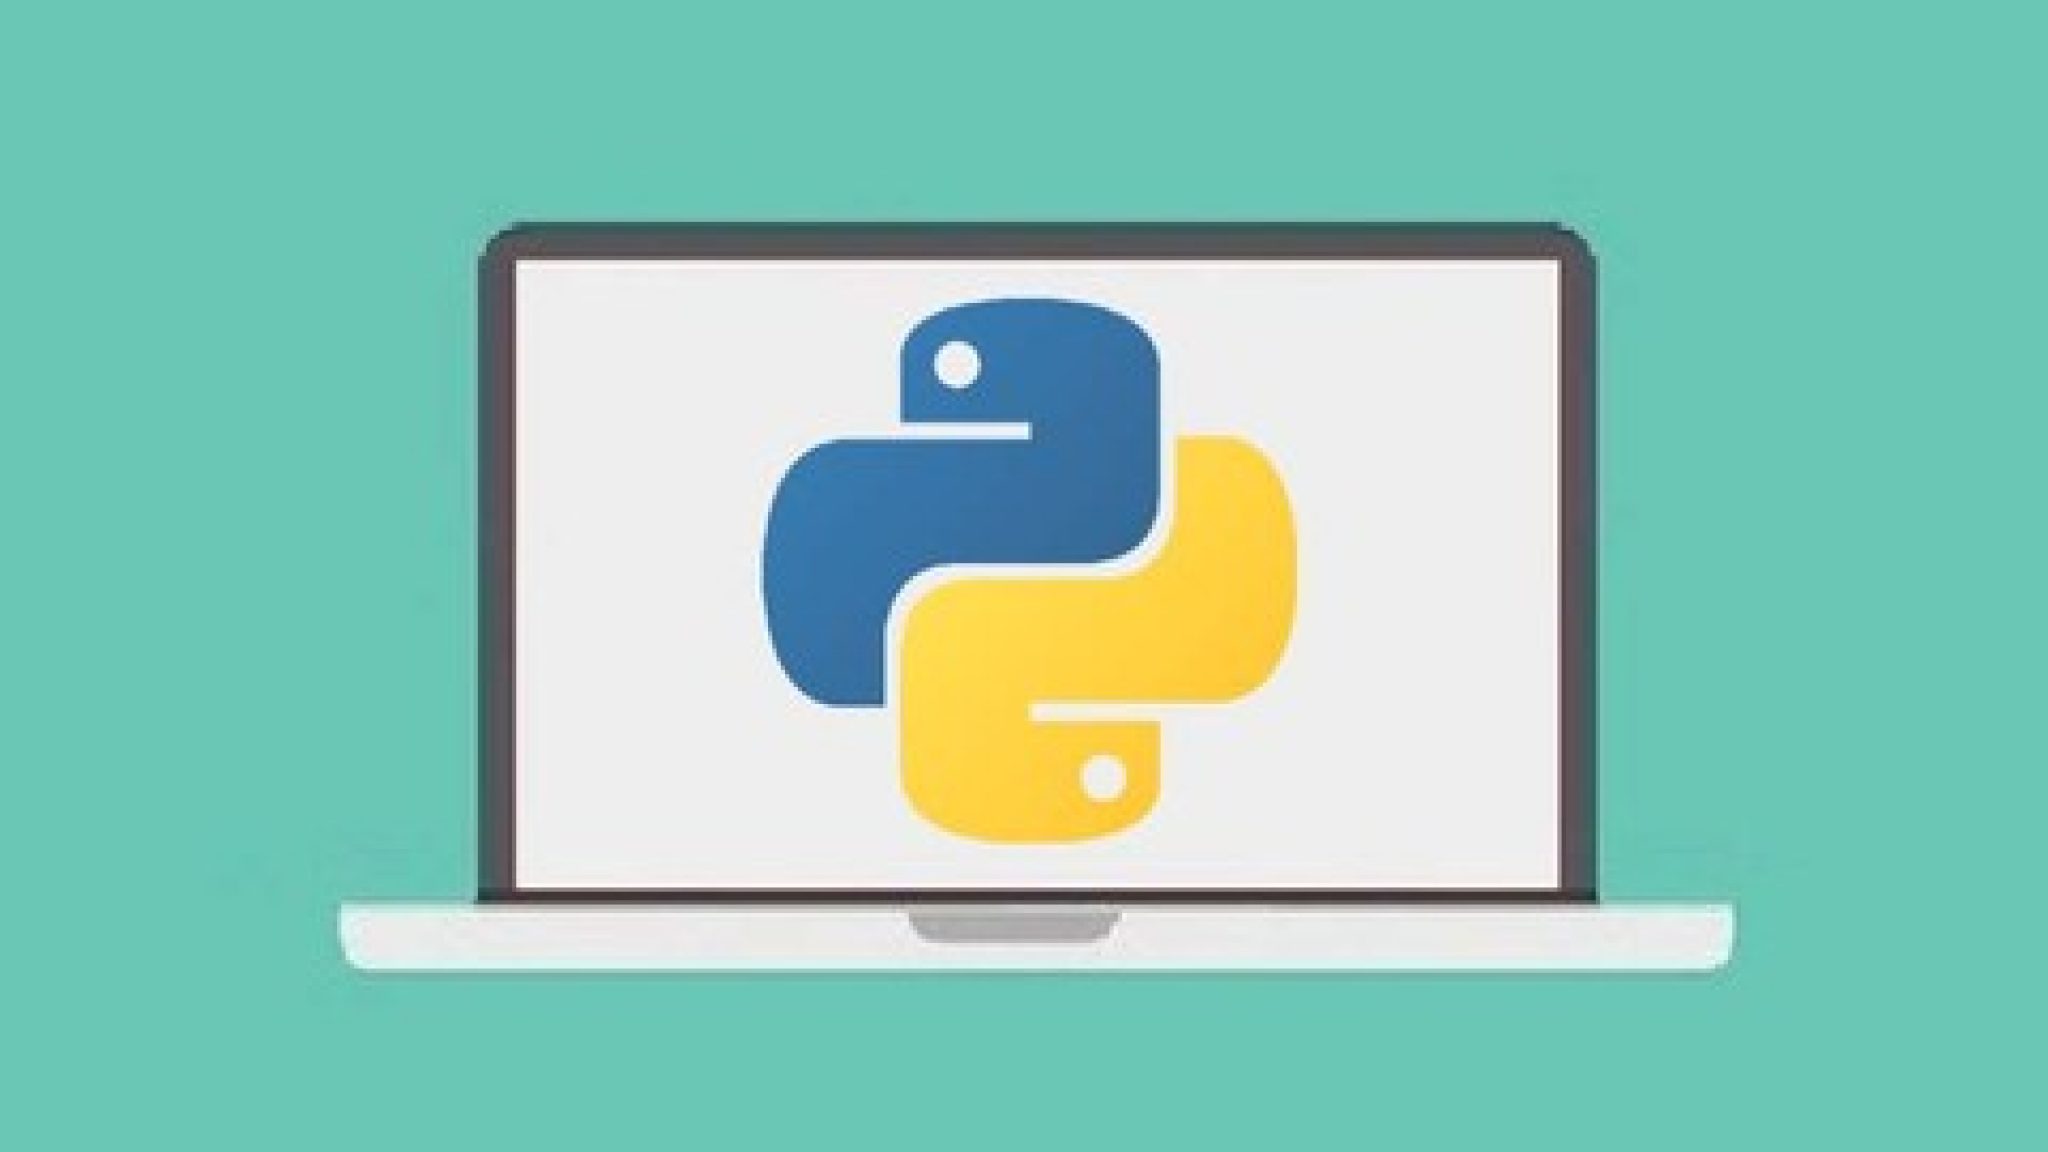 Call python from c. Офф Пайтон. From Python. Python курс. Python from Zero.